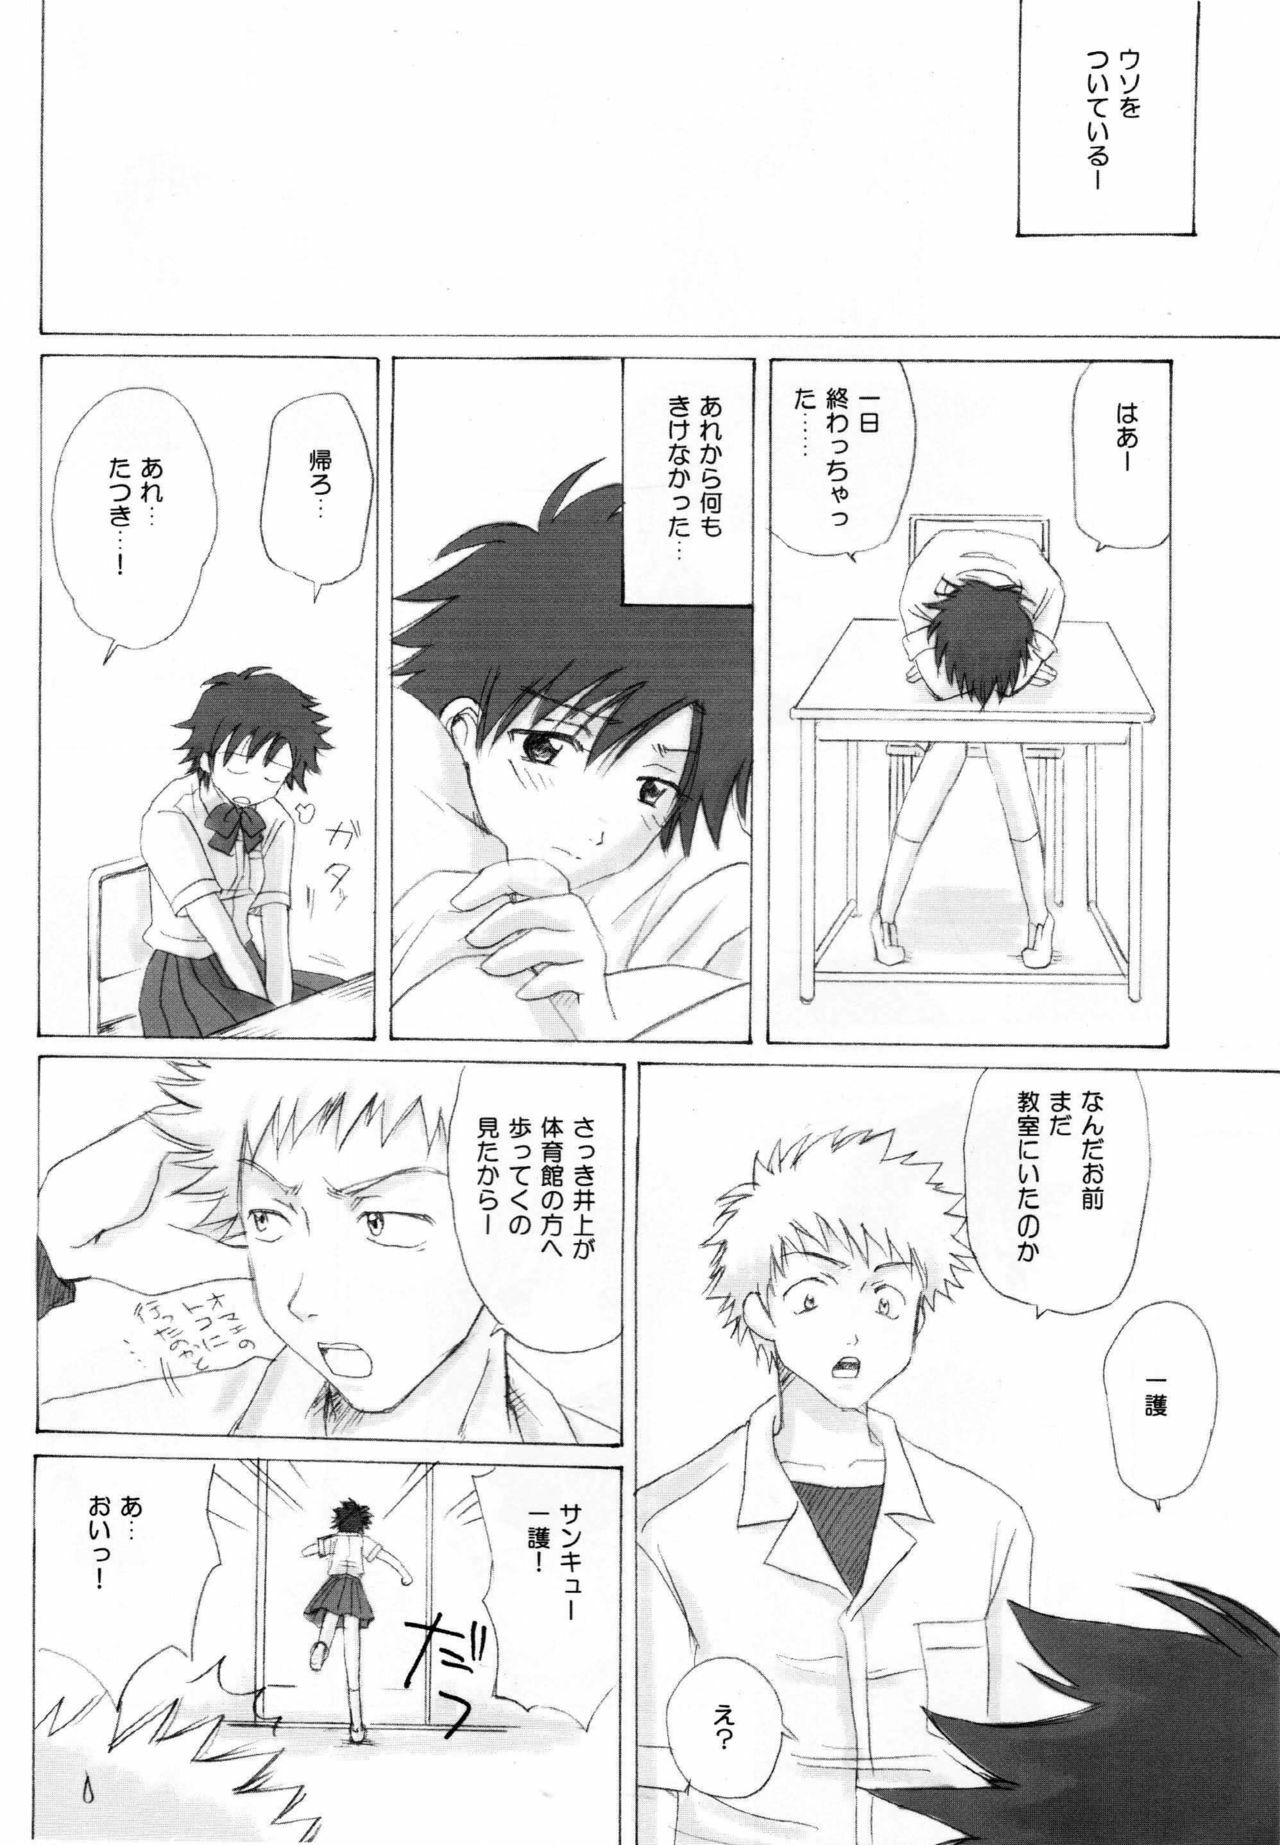 (C63) [Nikopondo (Aoyama Reo)] As You Are (Bleach) page 31 full